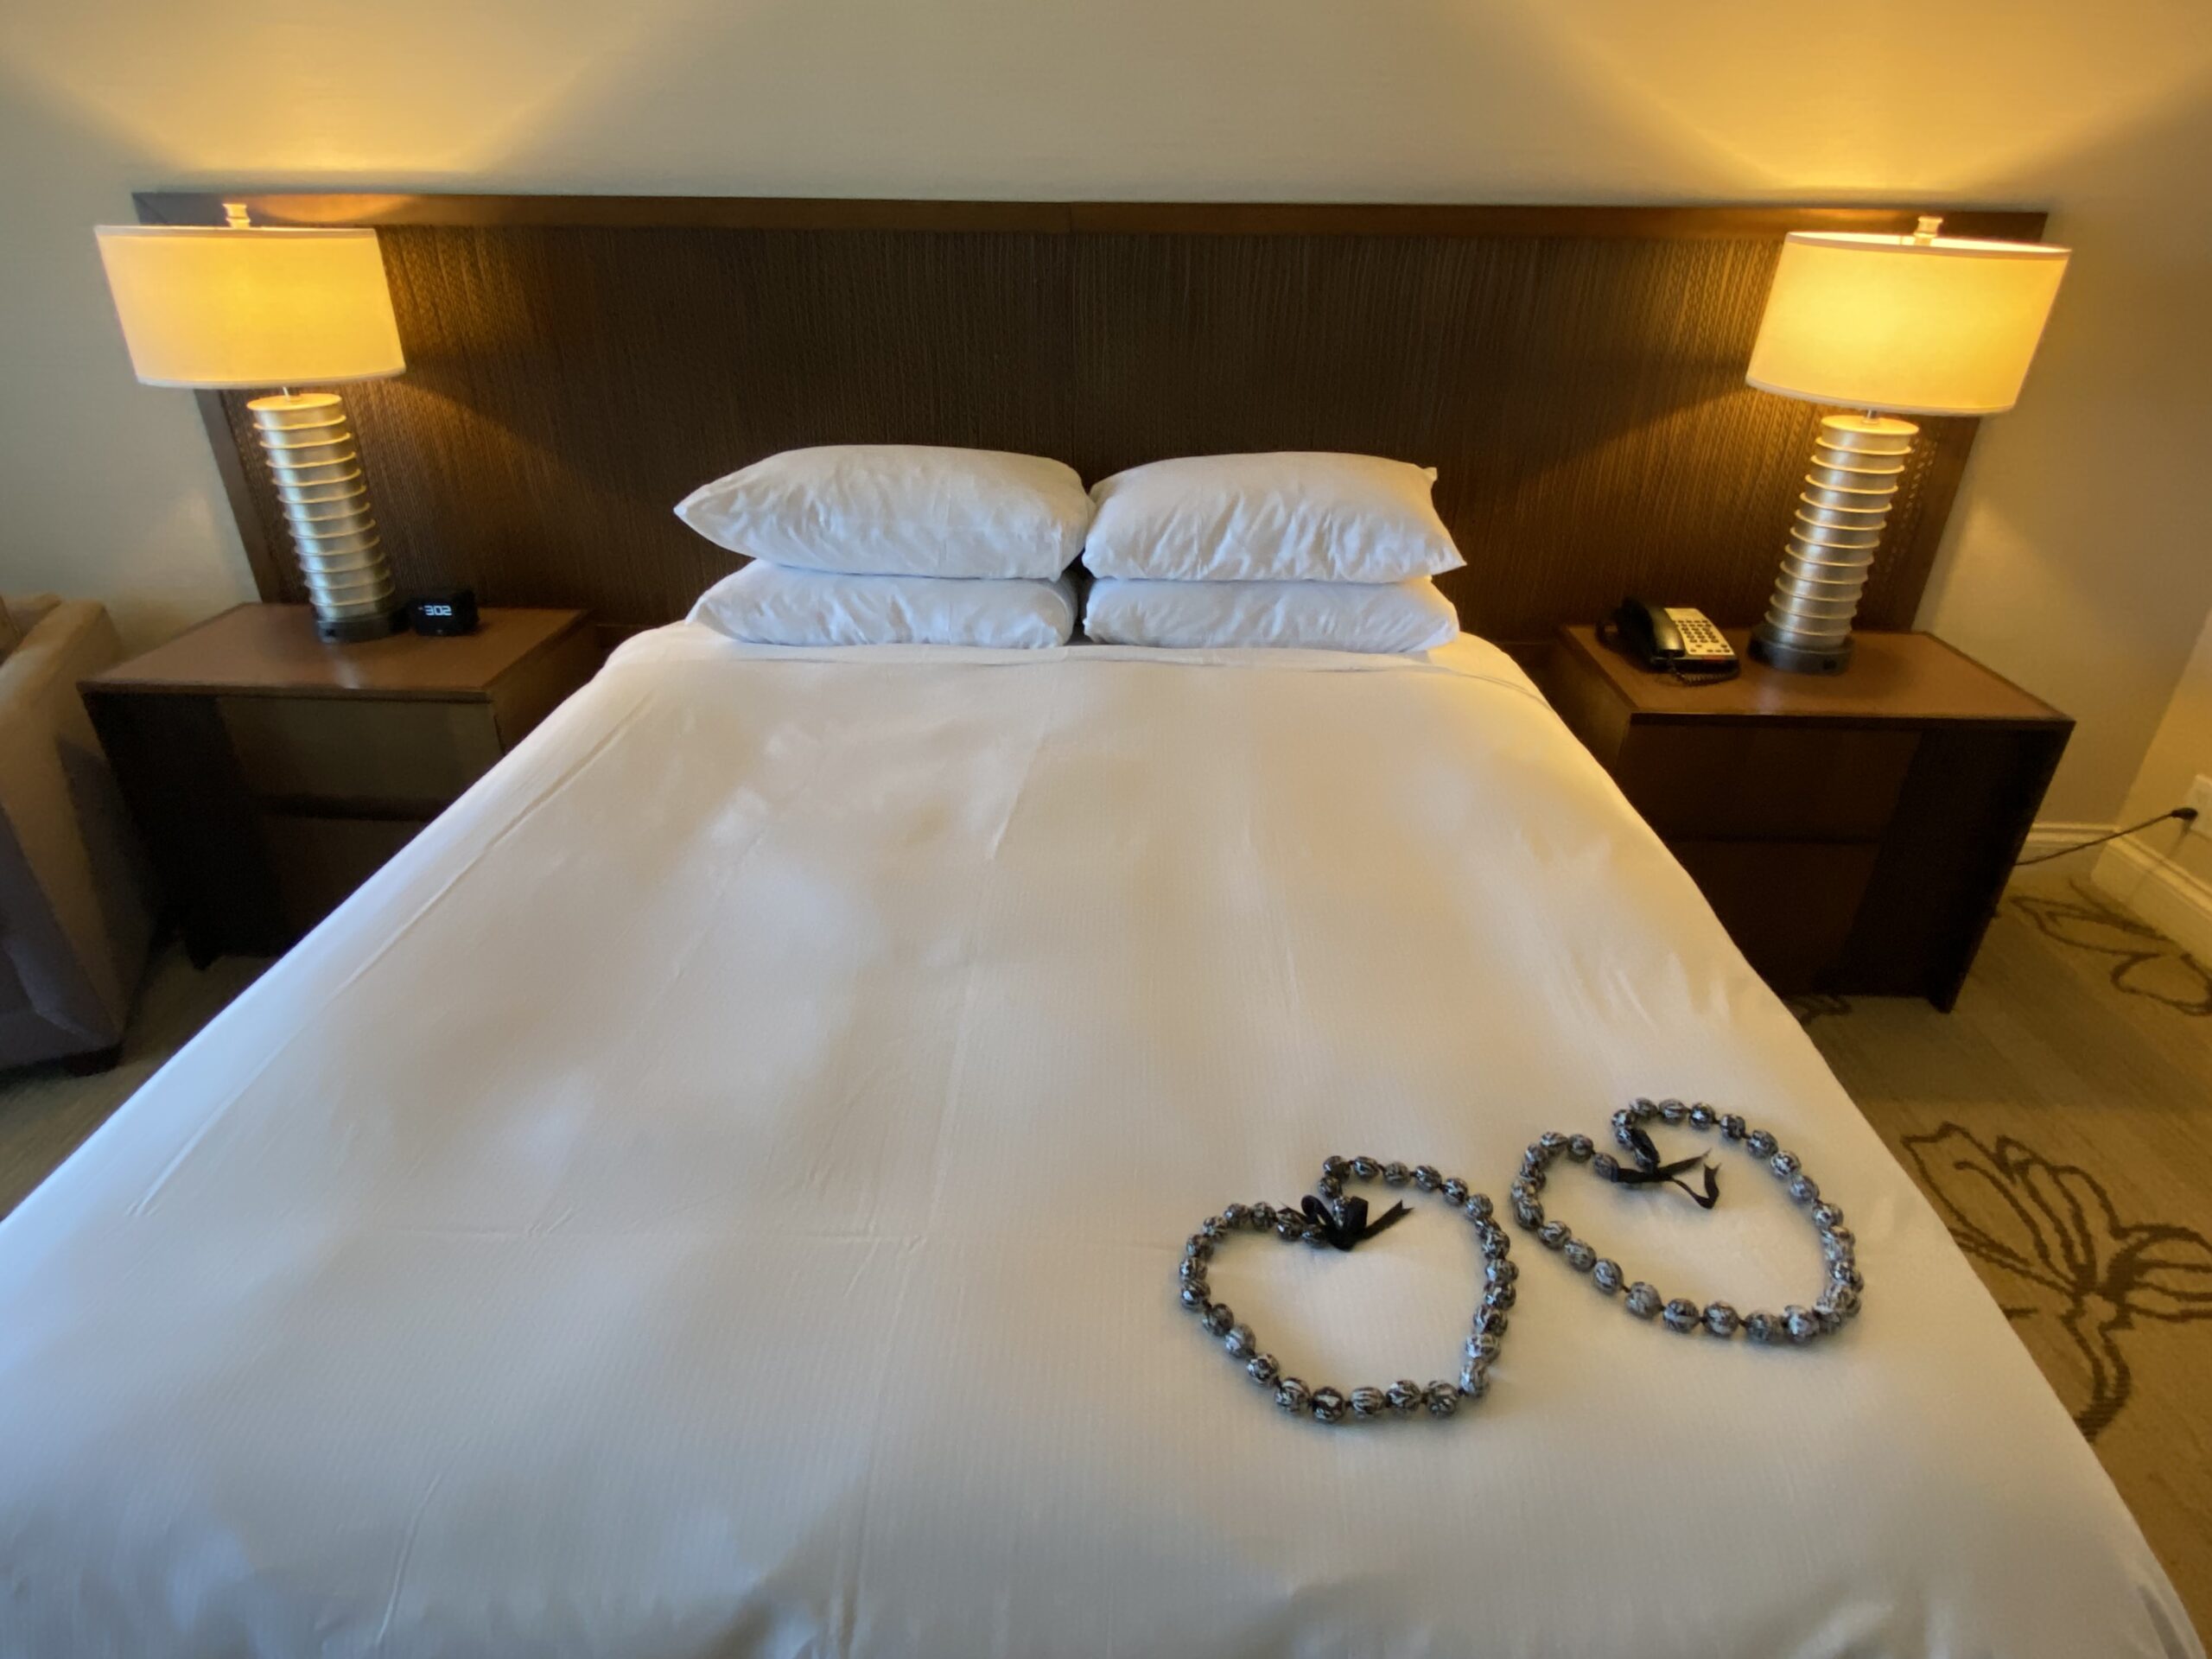 a bed with a couple of heart shaped beads on it